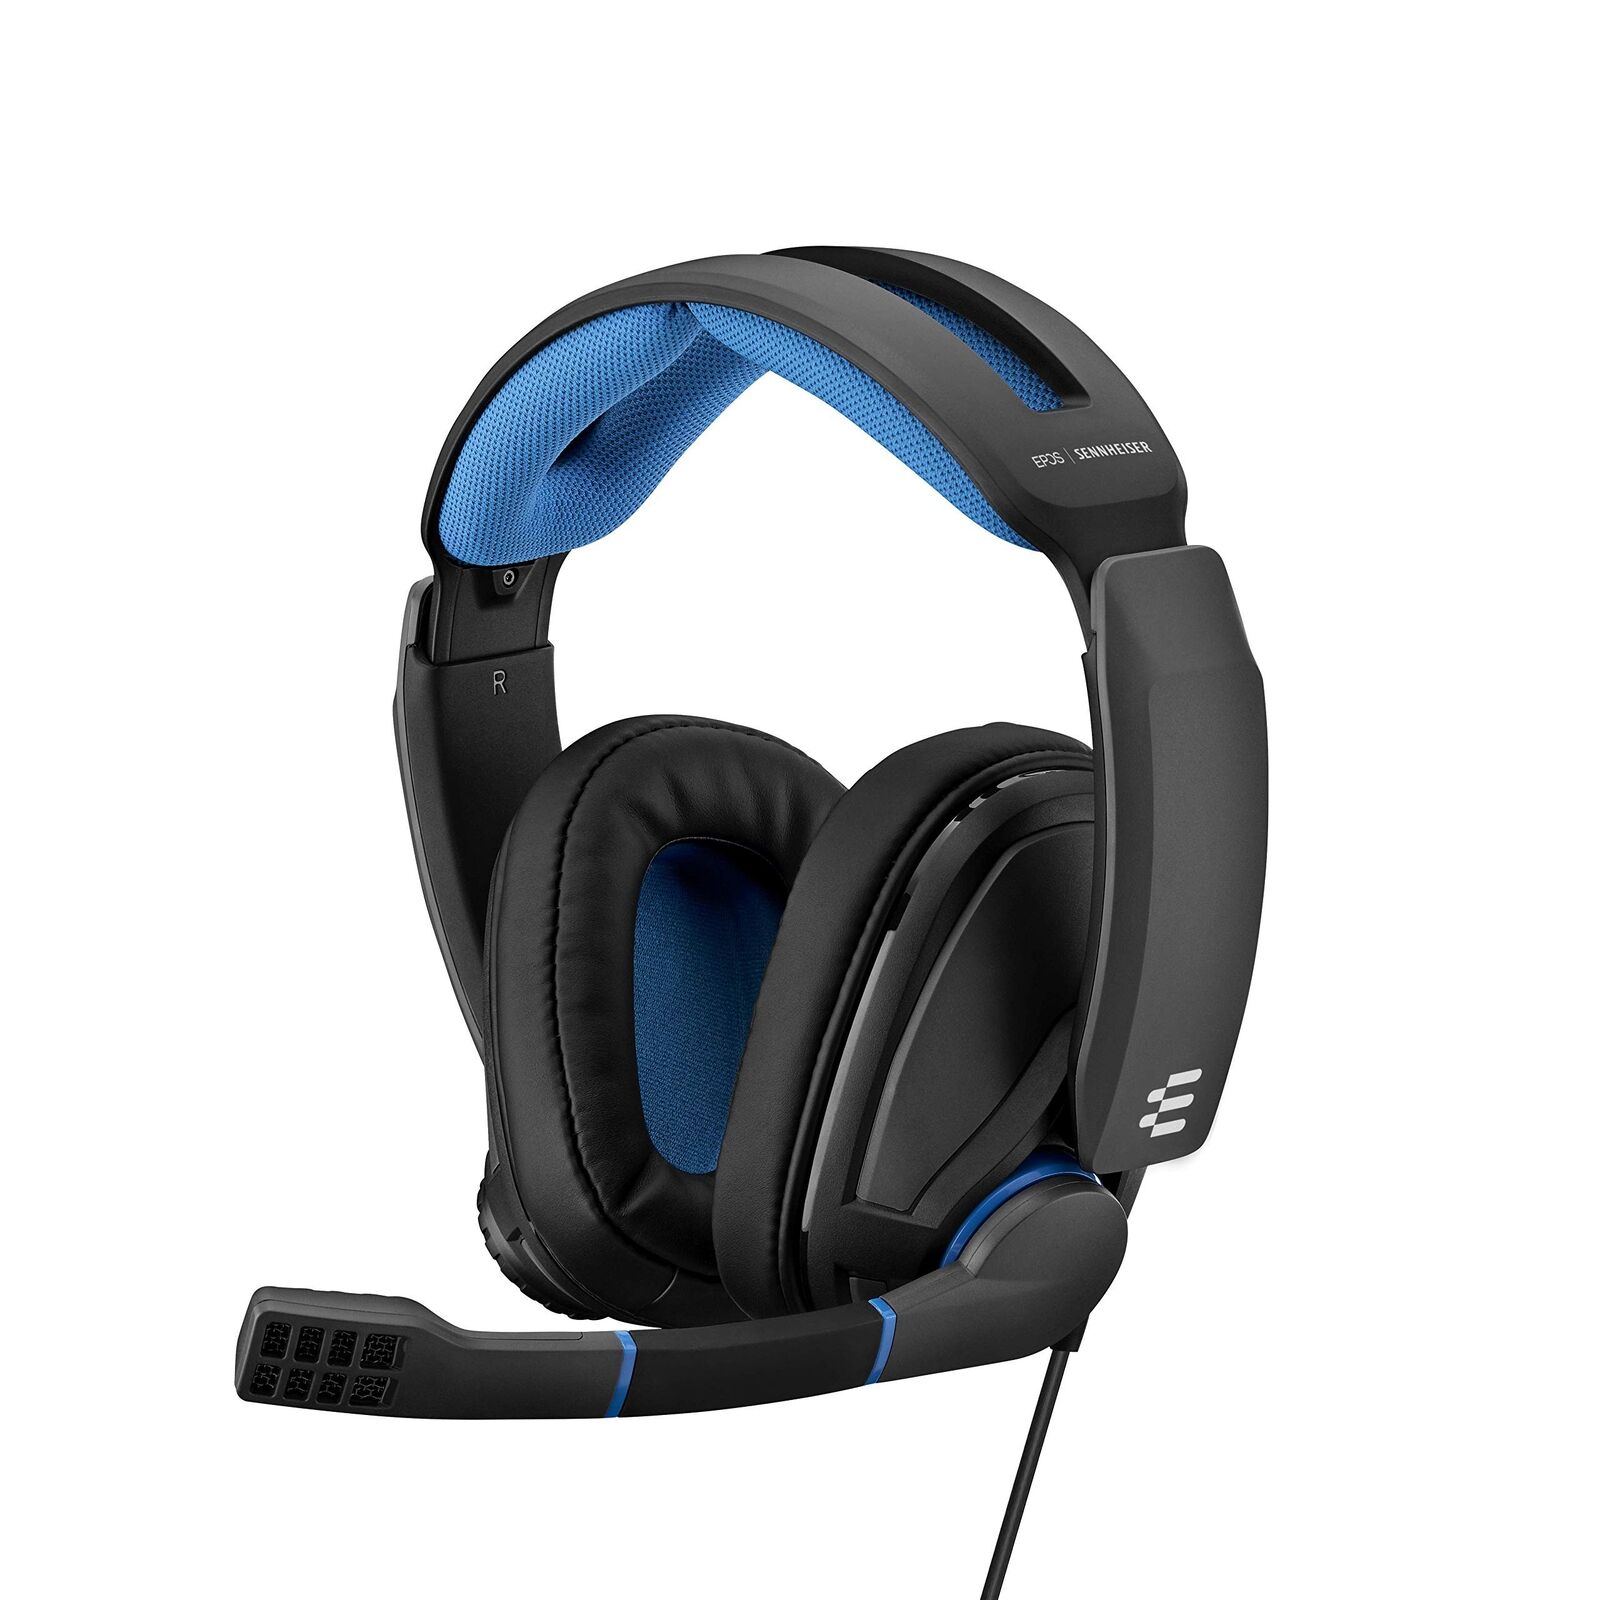 EPOS Sennheiser GSP 300 Gaming Headset with Noise-Cancelling Mic, Flip-to-Mut...